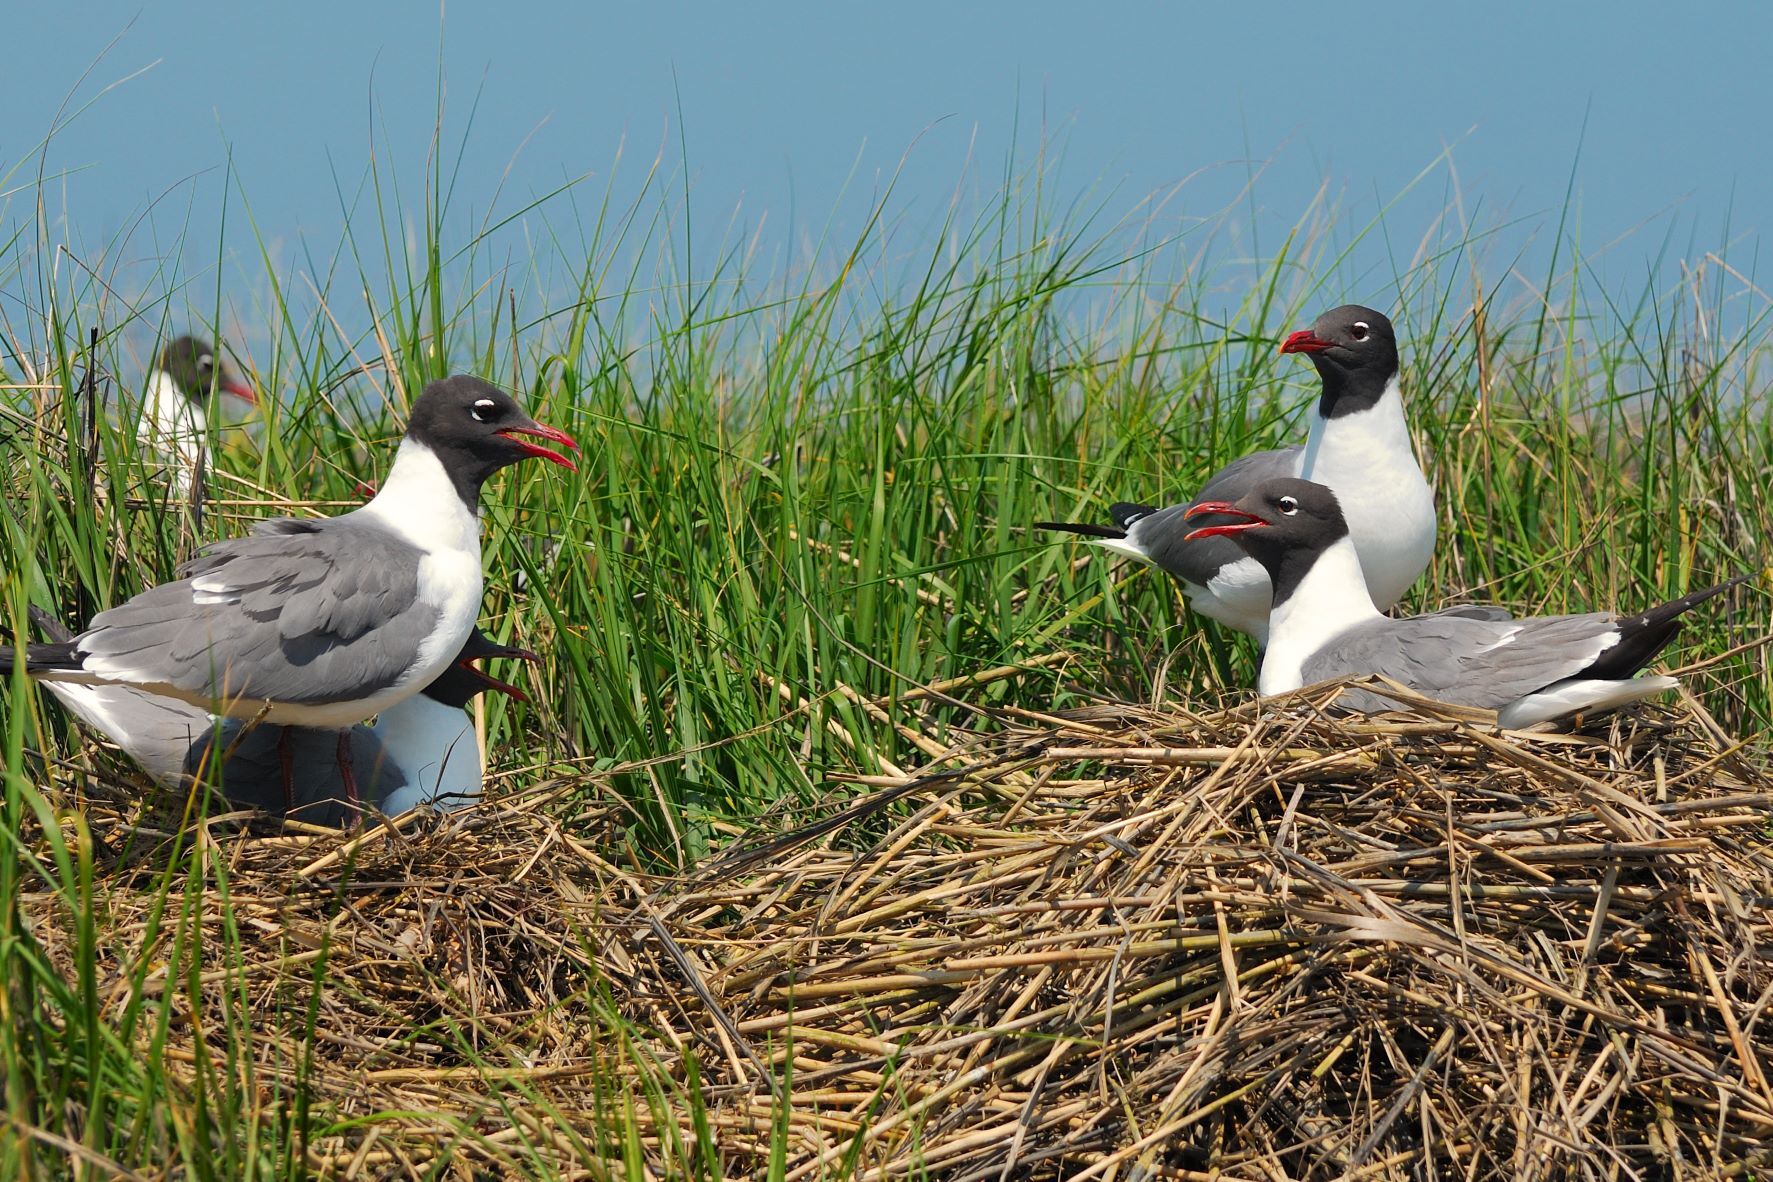 Laughing Gulls nest in salt marsh, on vegetation that may float during high tide. Photo: Alberto V05/<a href="https://creativecommons.org/licenses/by-nc/2.0/" target="_blank" >CC BY-NC 2.0</a>